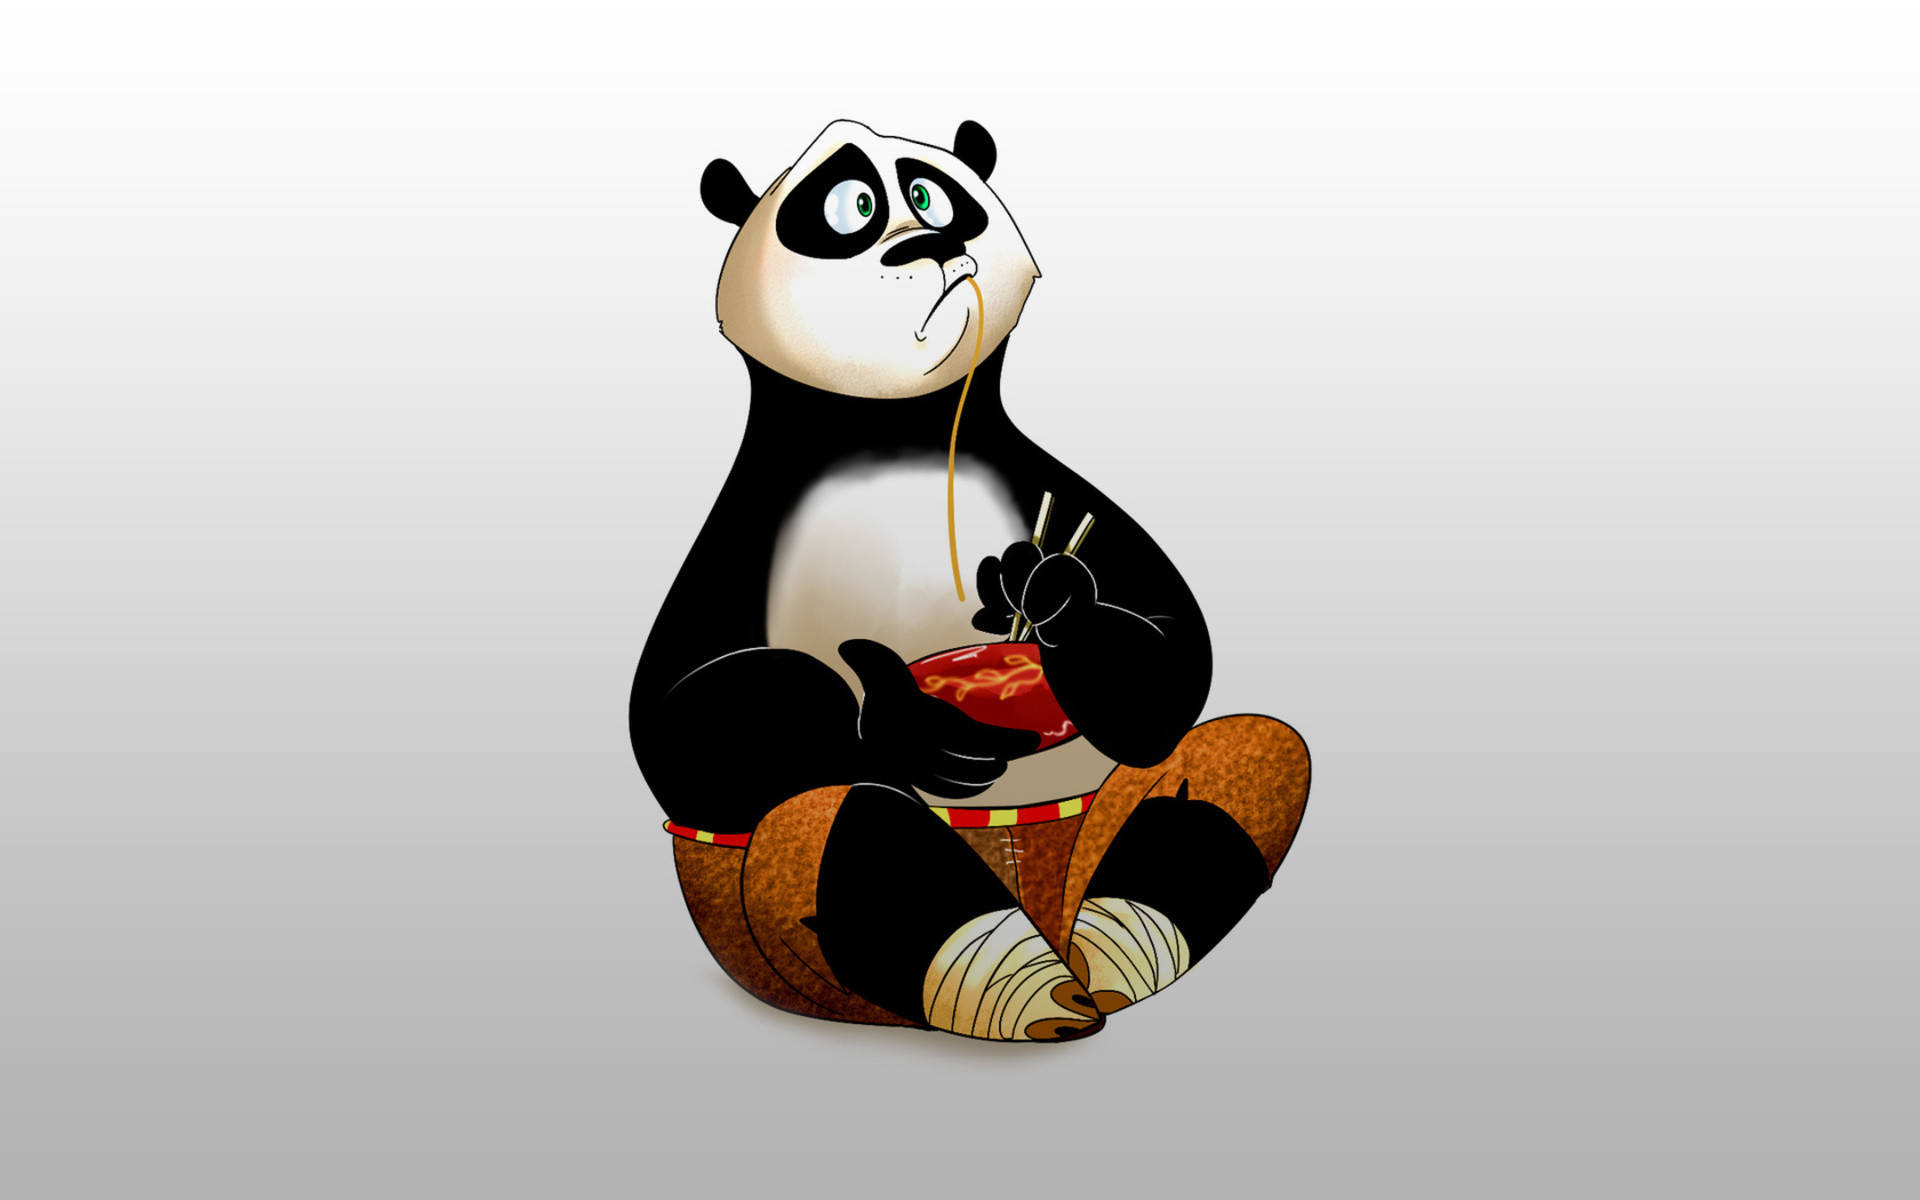 Po The Panda Enthusiastically Indulging In His Favorite Bowl Of Noodles!